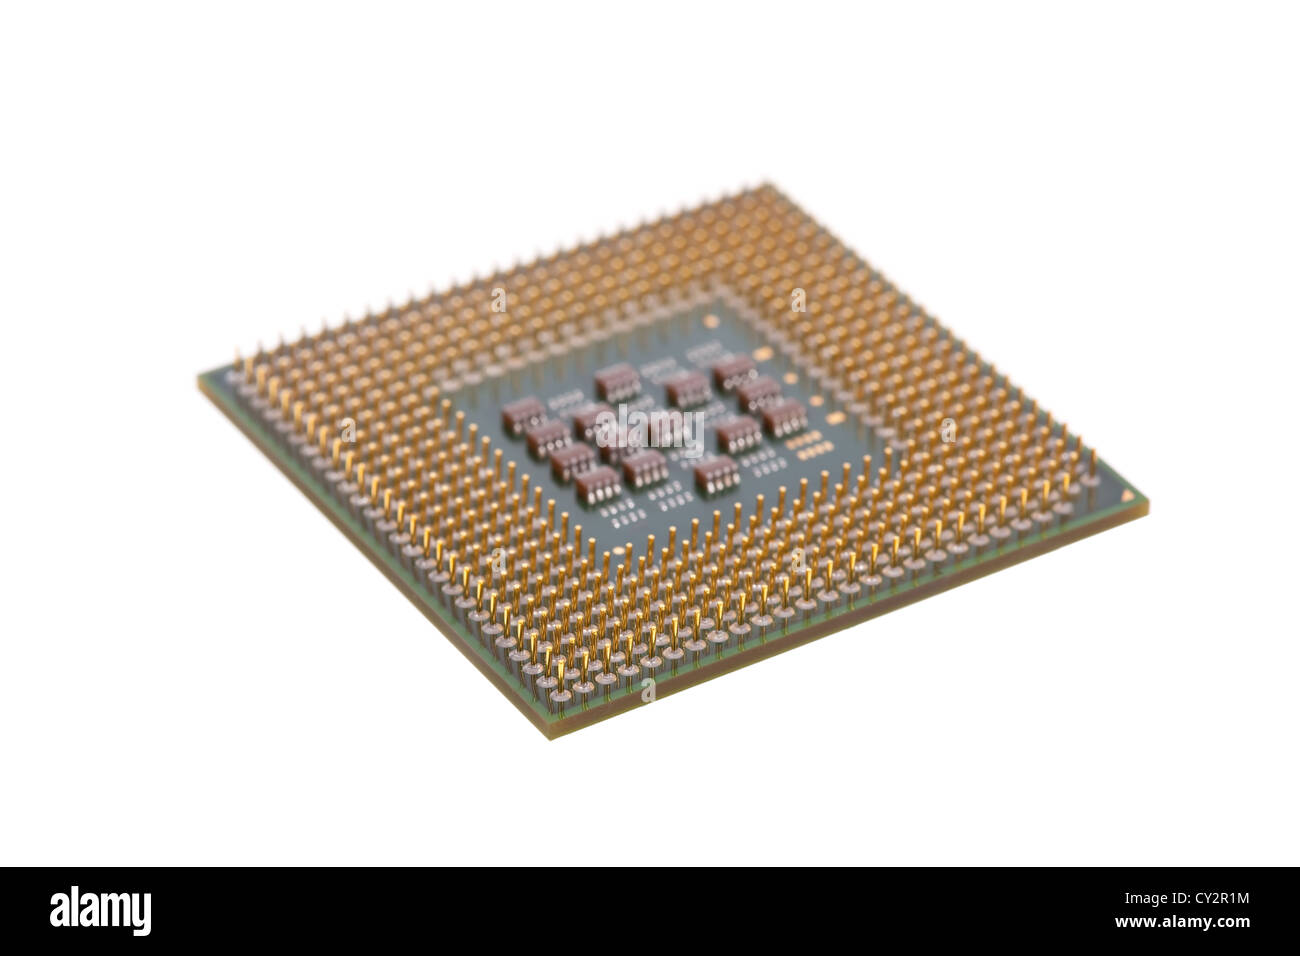 It is silicone chip CPU on white background Stock Photo - Alamy